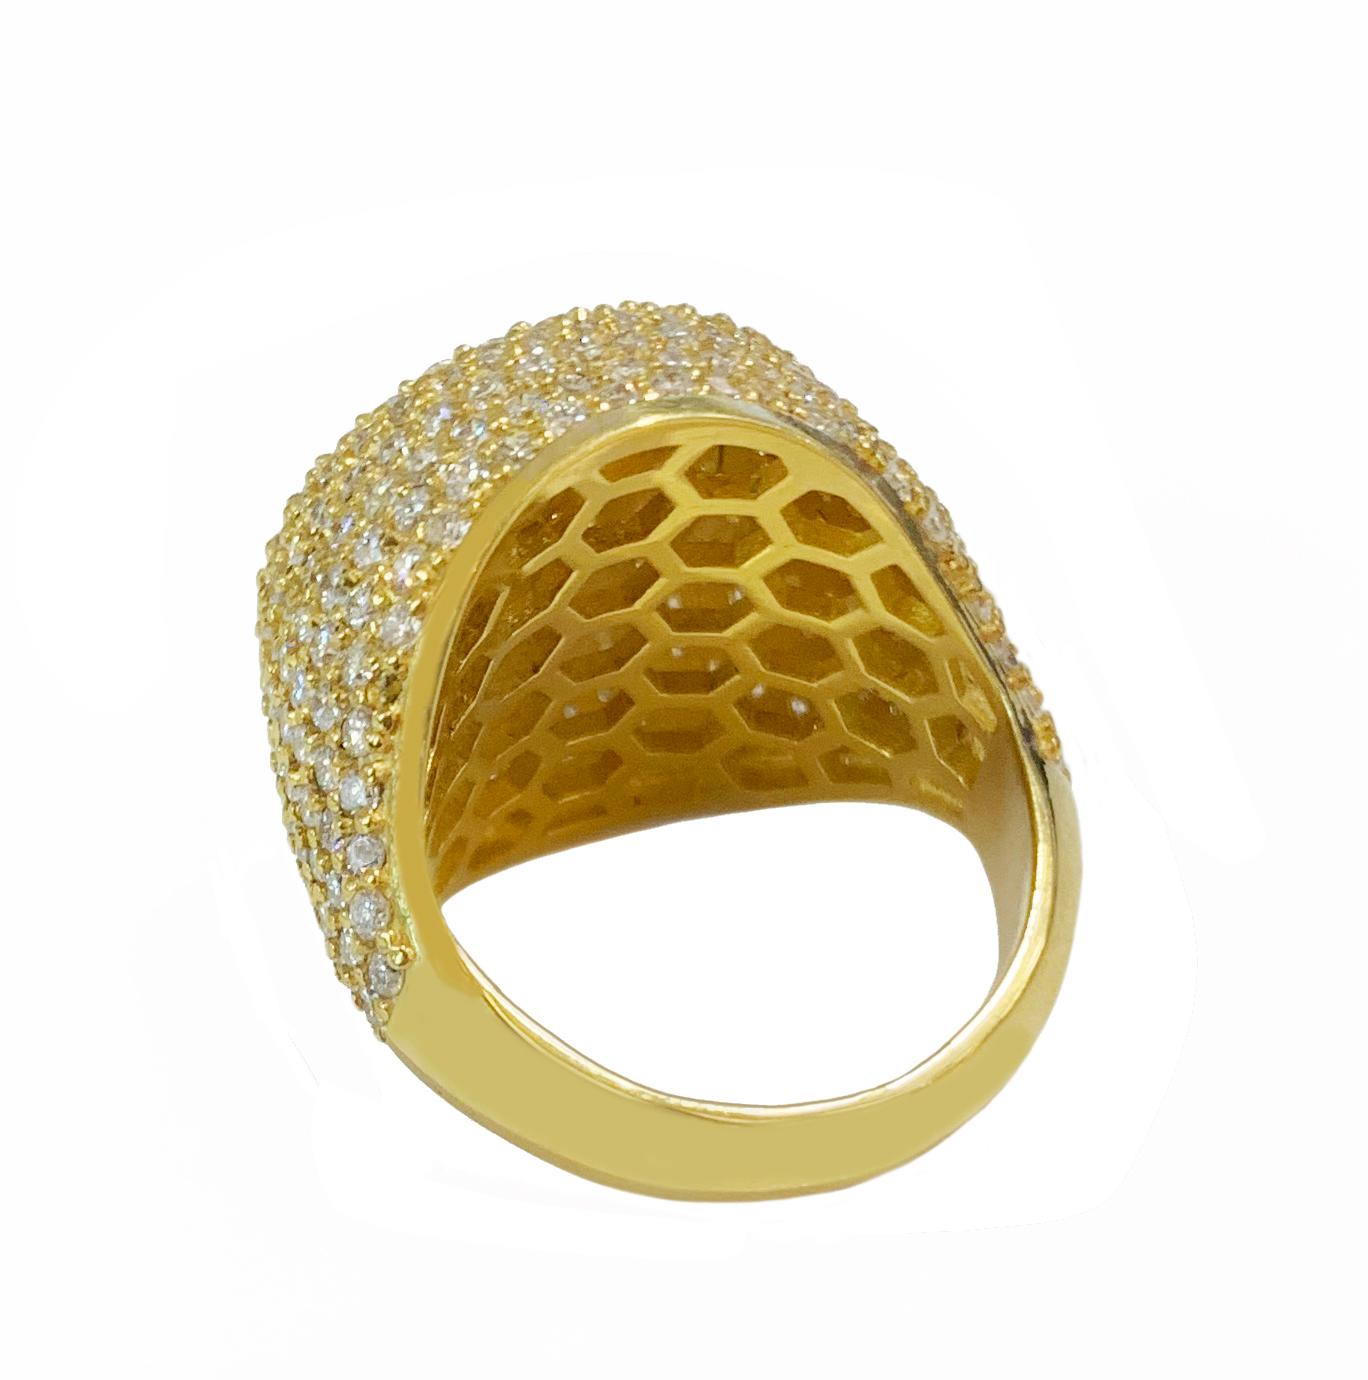 Material: 14k Yellow Gold 
Weight: 13.9gr 
Stones: Diamond 
Diamonds: 3.75ct VS clarity G color 
Ring size :7.5
Ornament Dimension:21x22mm